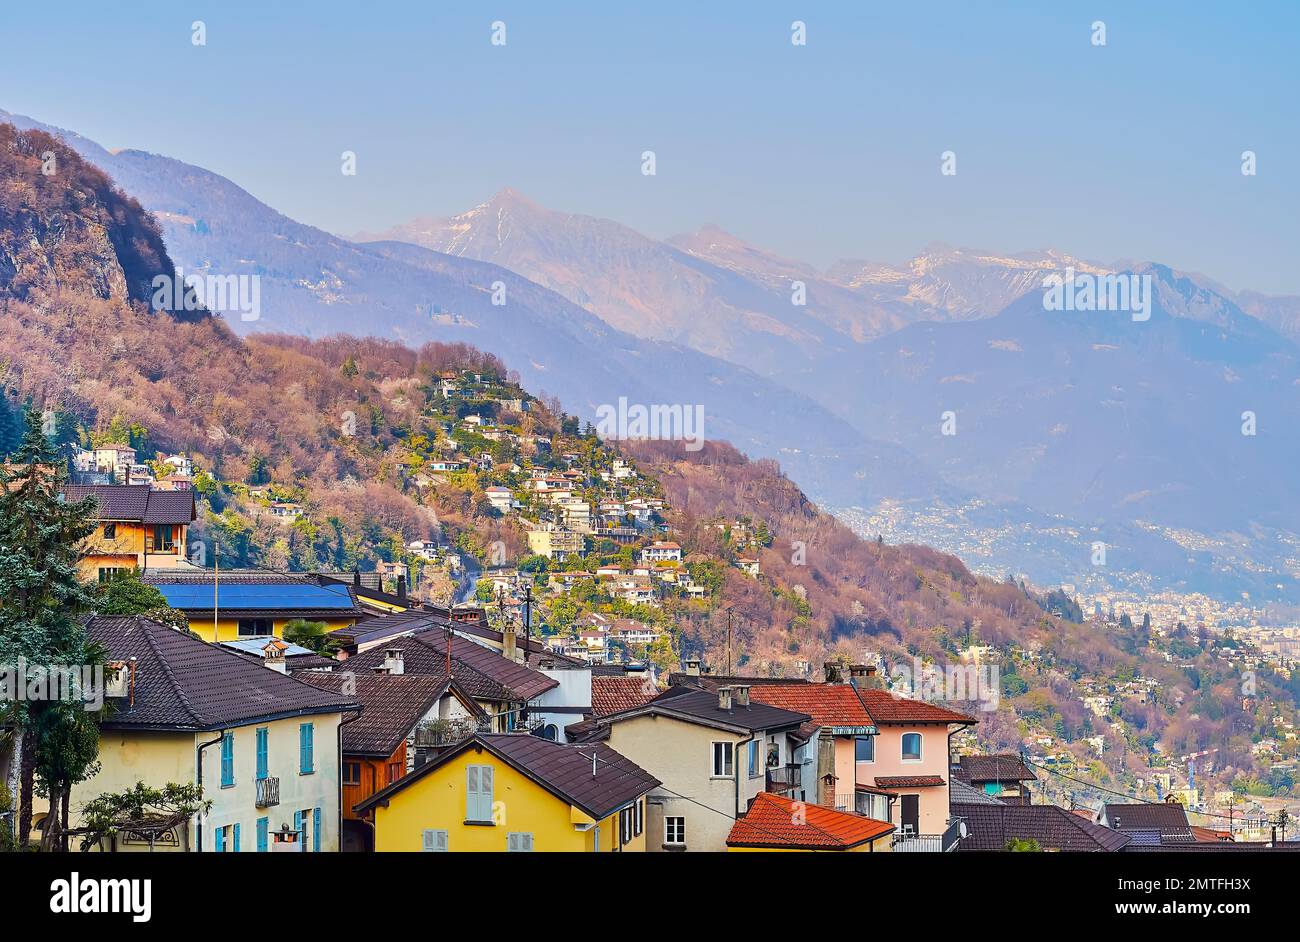 Alpine slopes, covered with small houses, forests and topped with snow from the mountain village of Ronco sopra Ascona, Switzerland Stock Photo